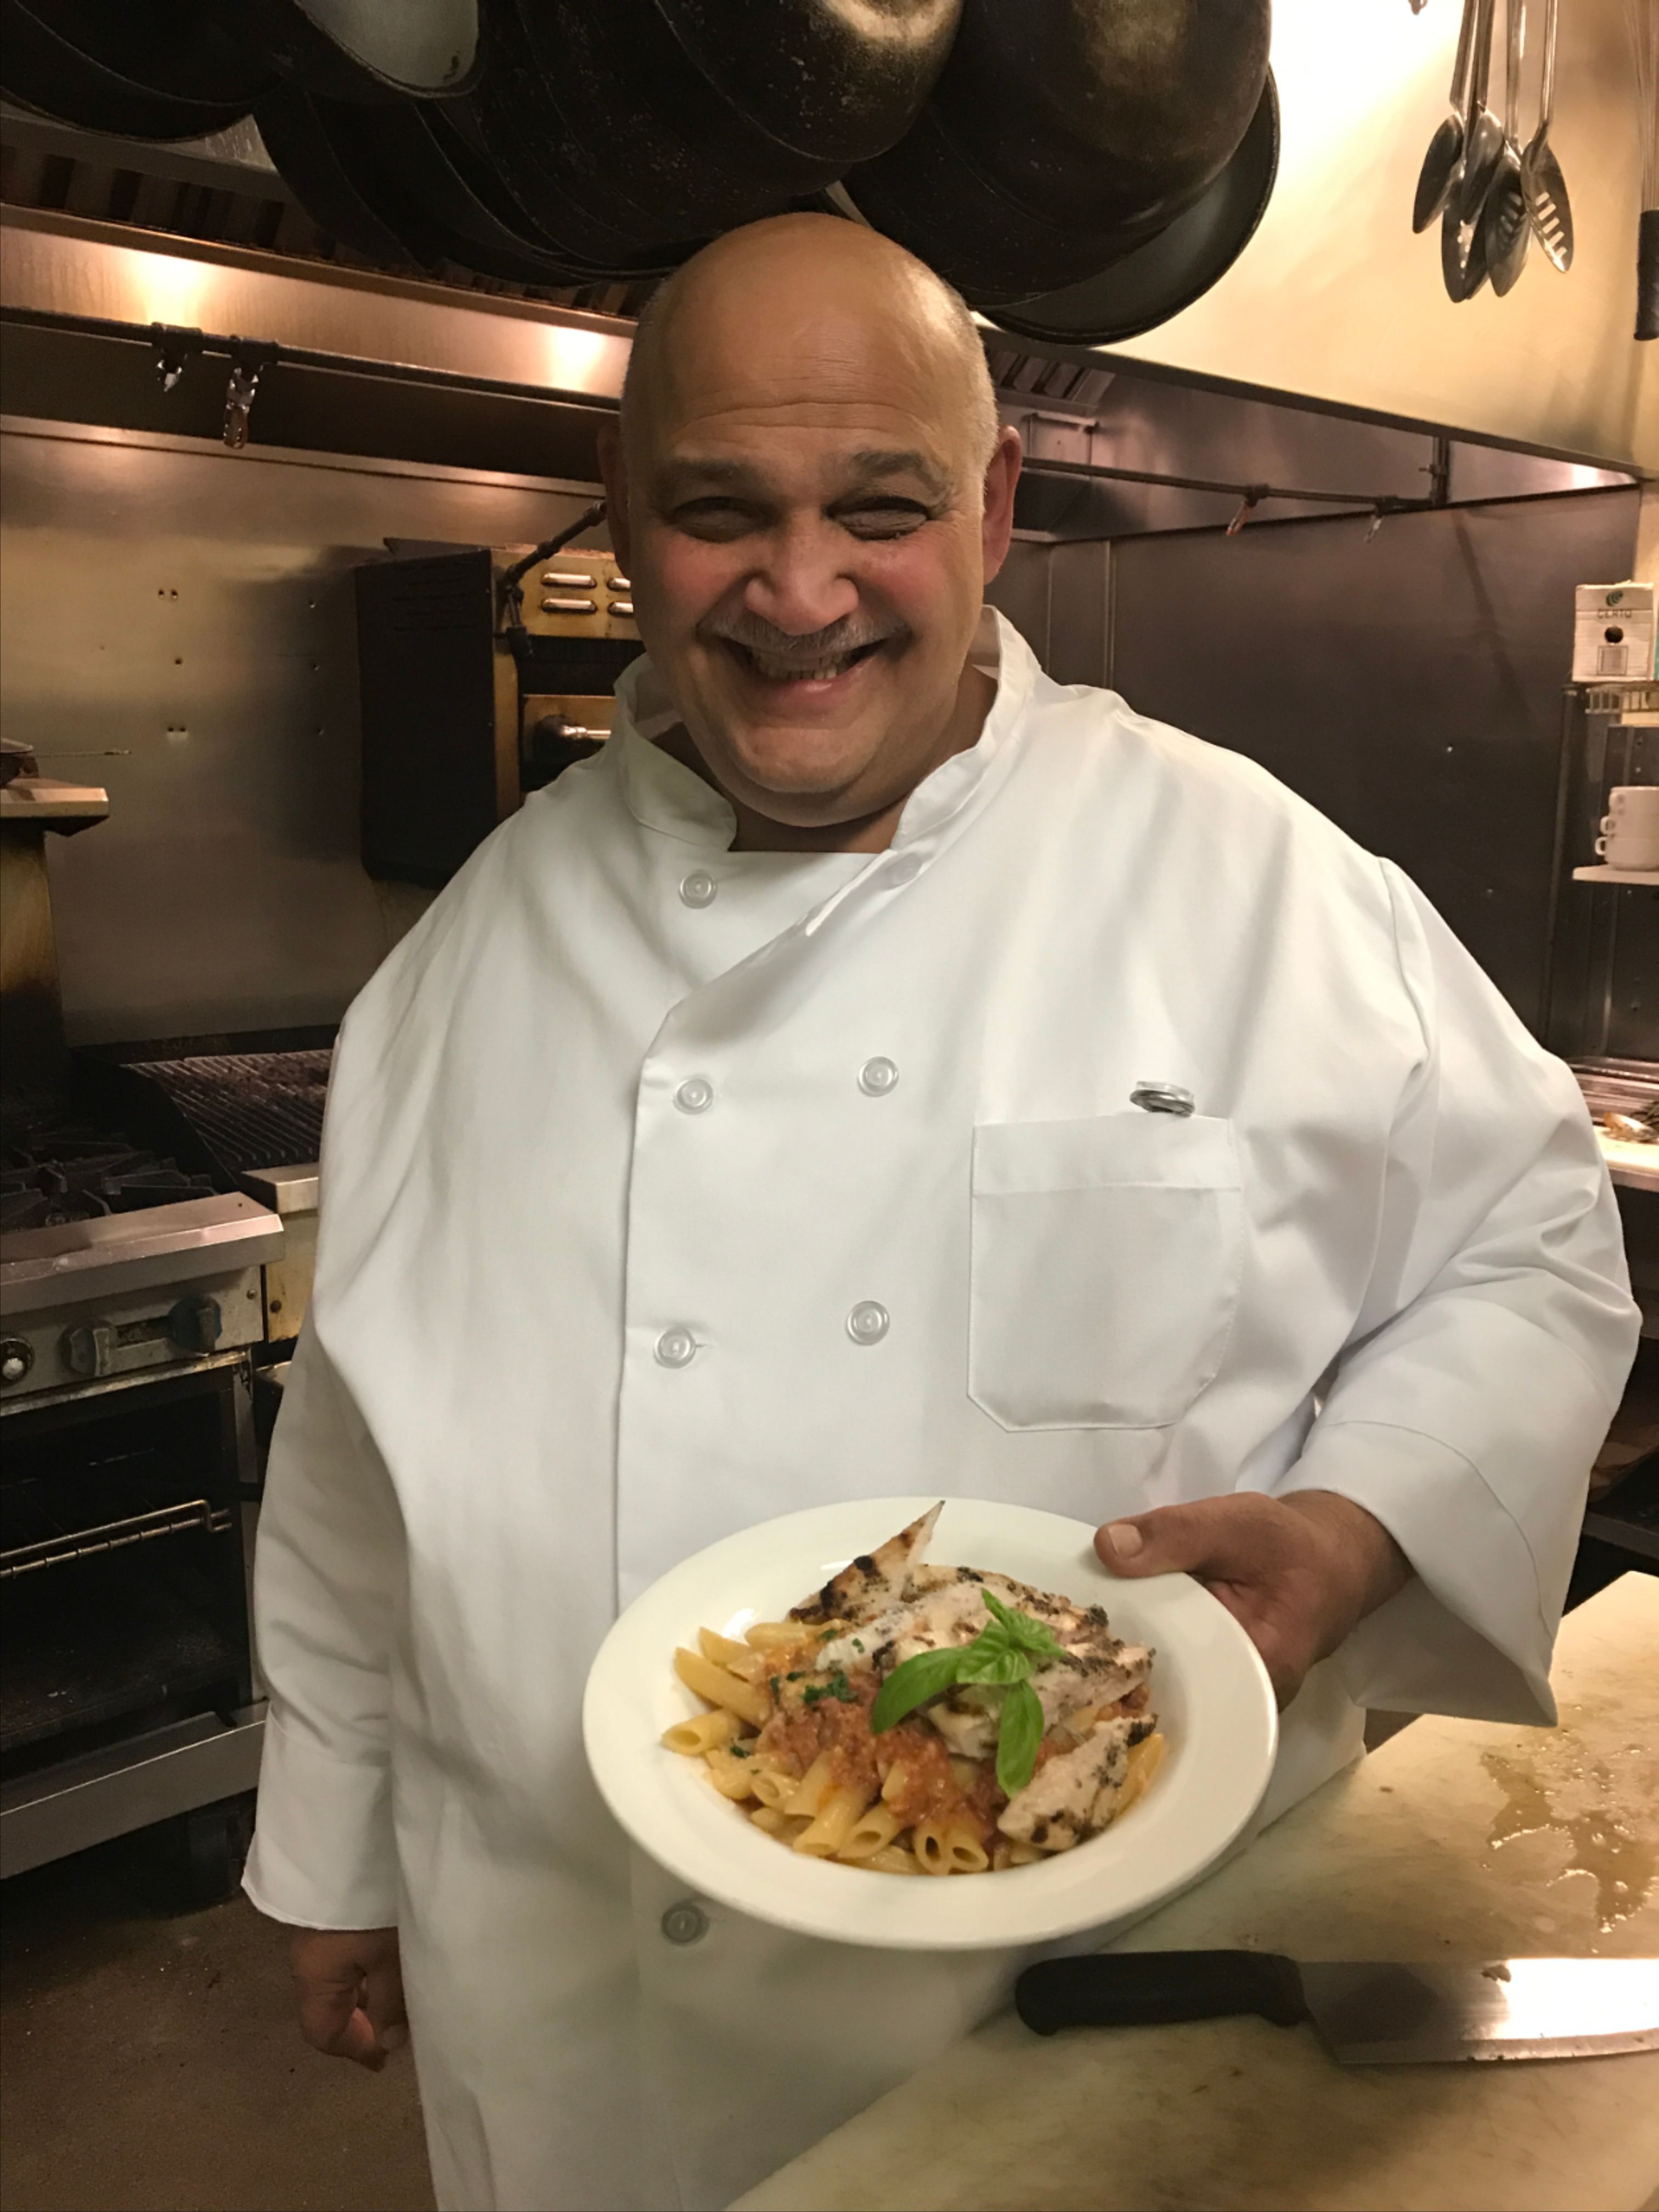 mike smiling and holding a dish with food